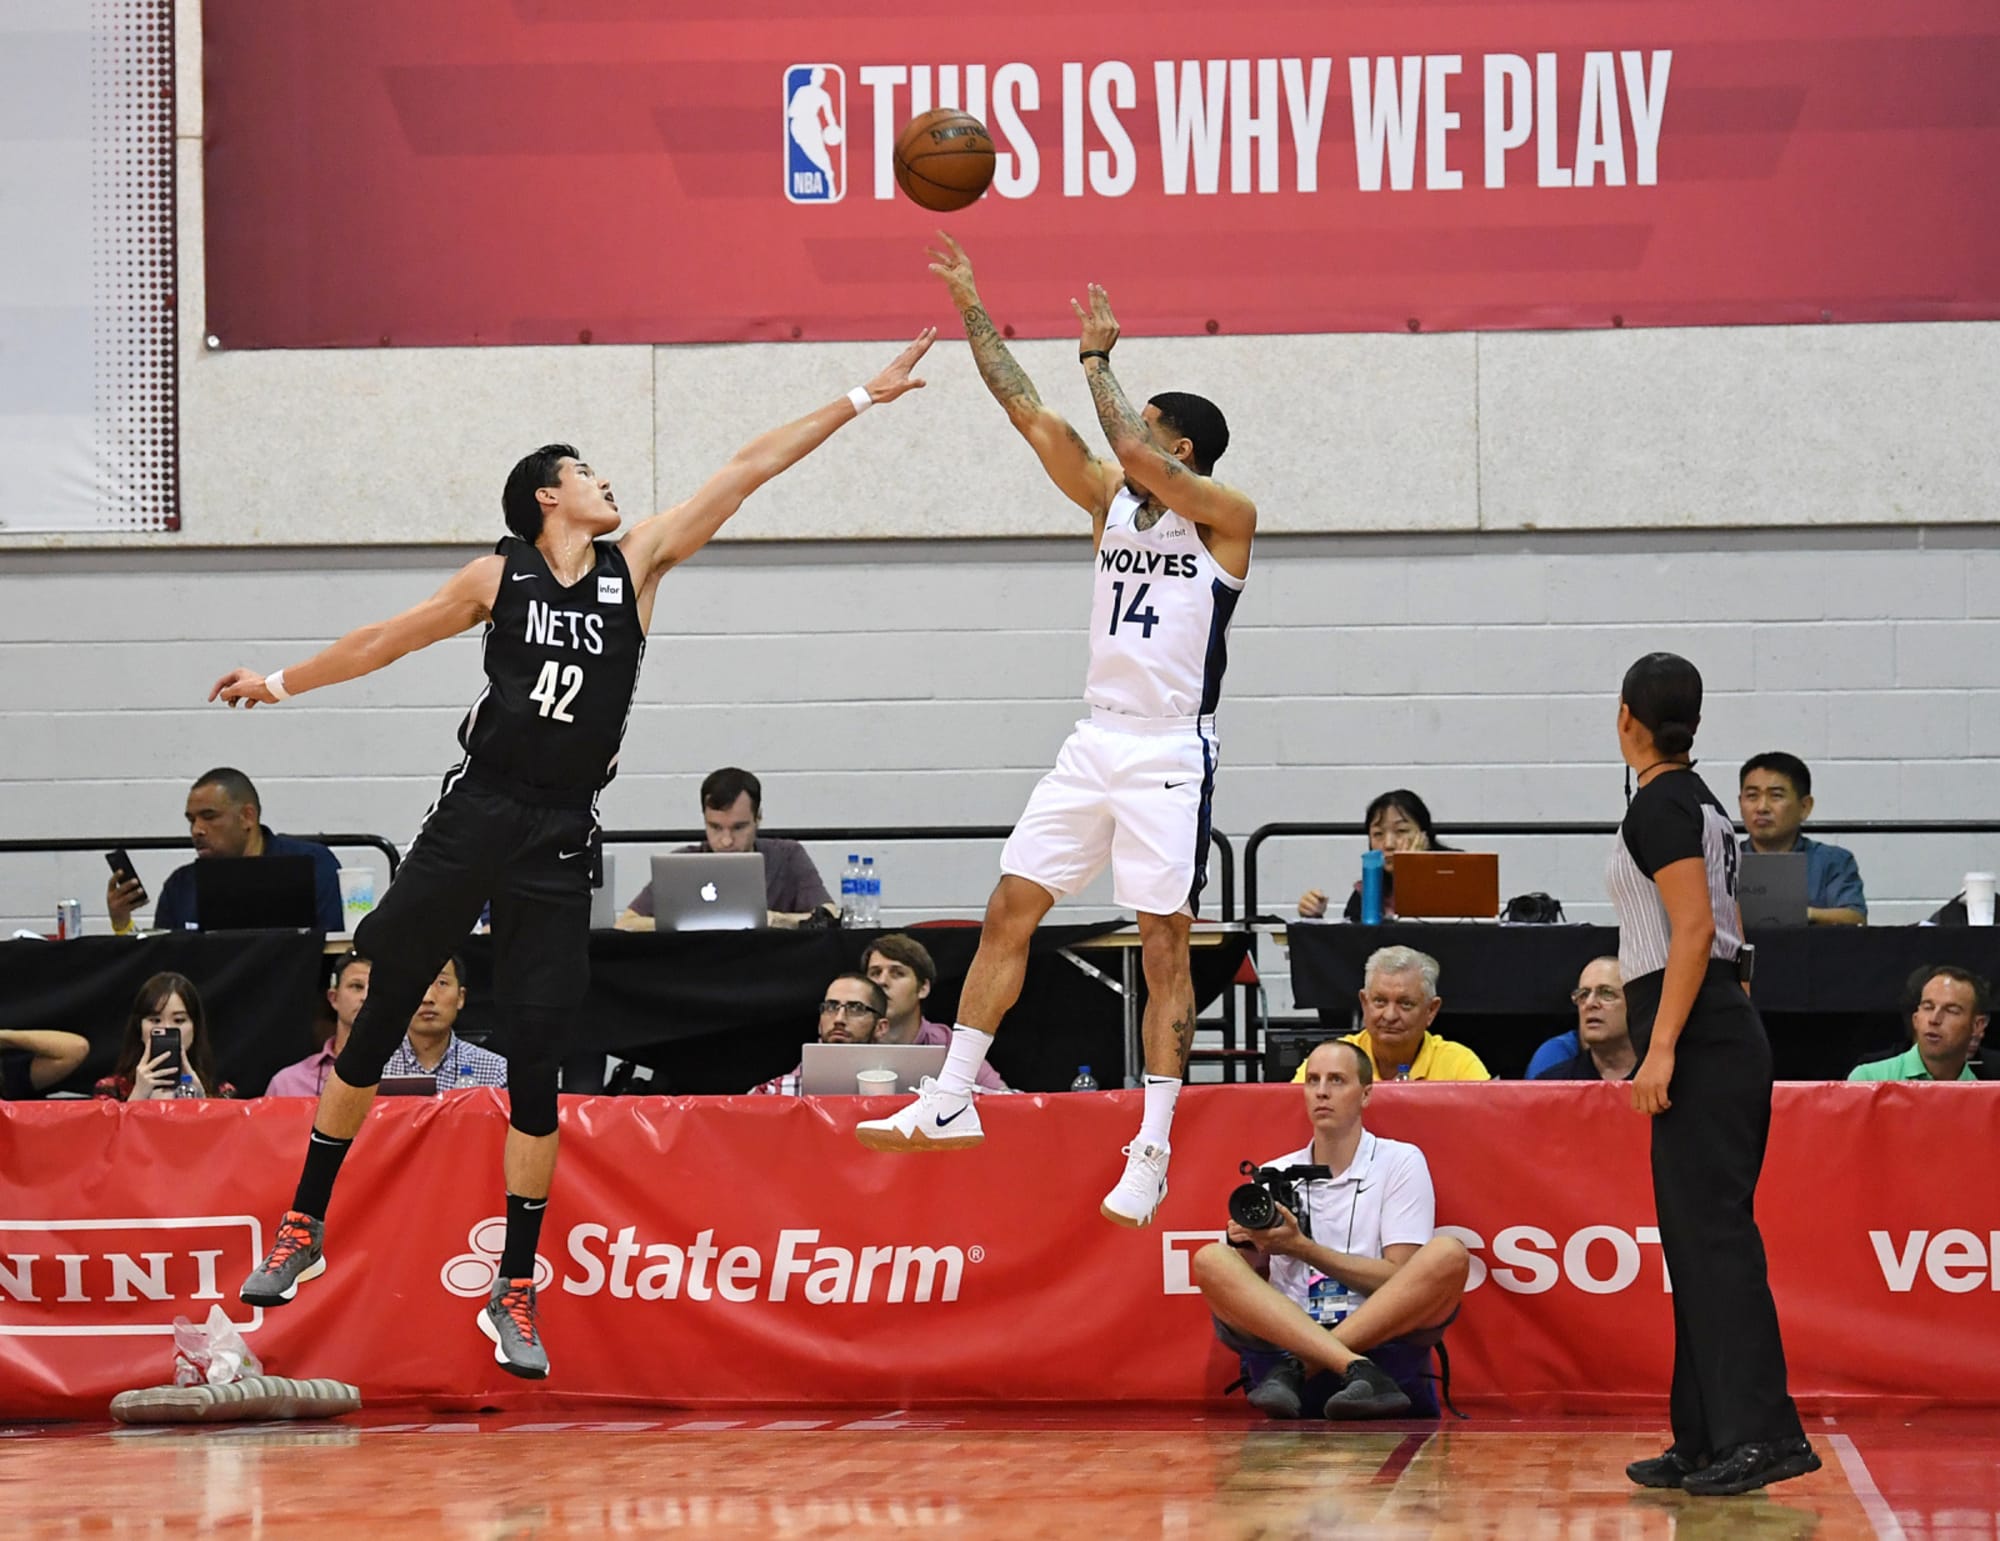 Revisiting the Minnesota Timberwolves summer league roster